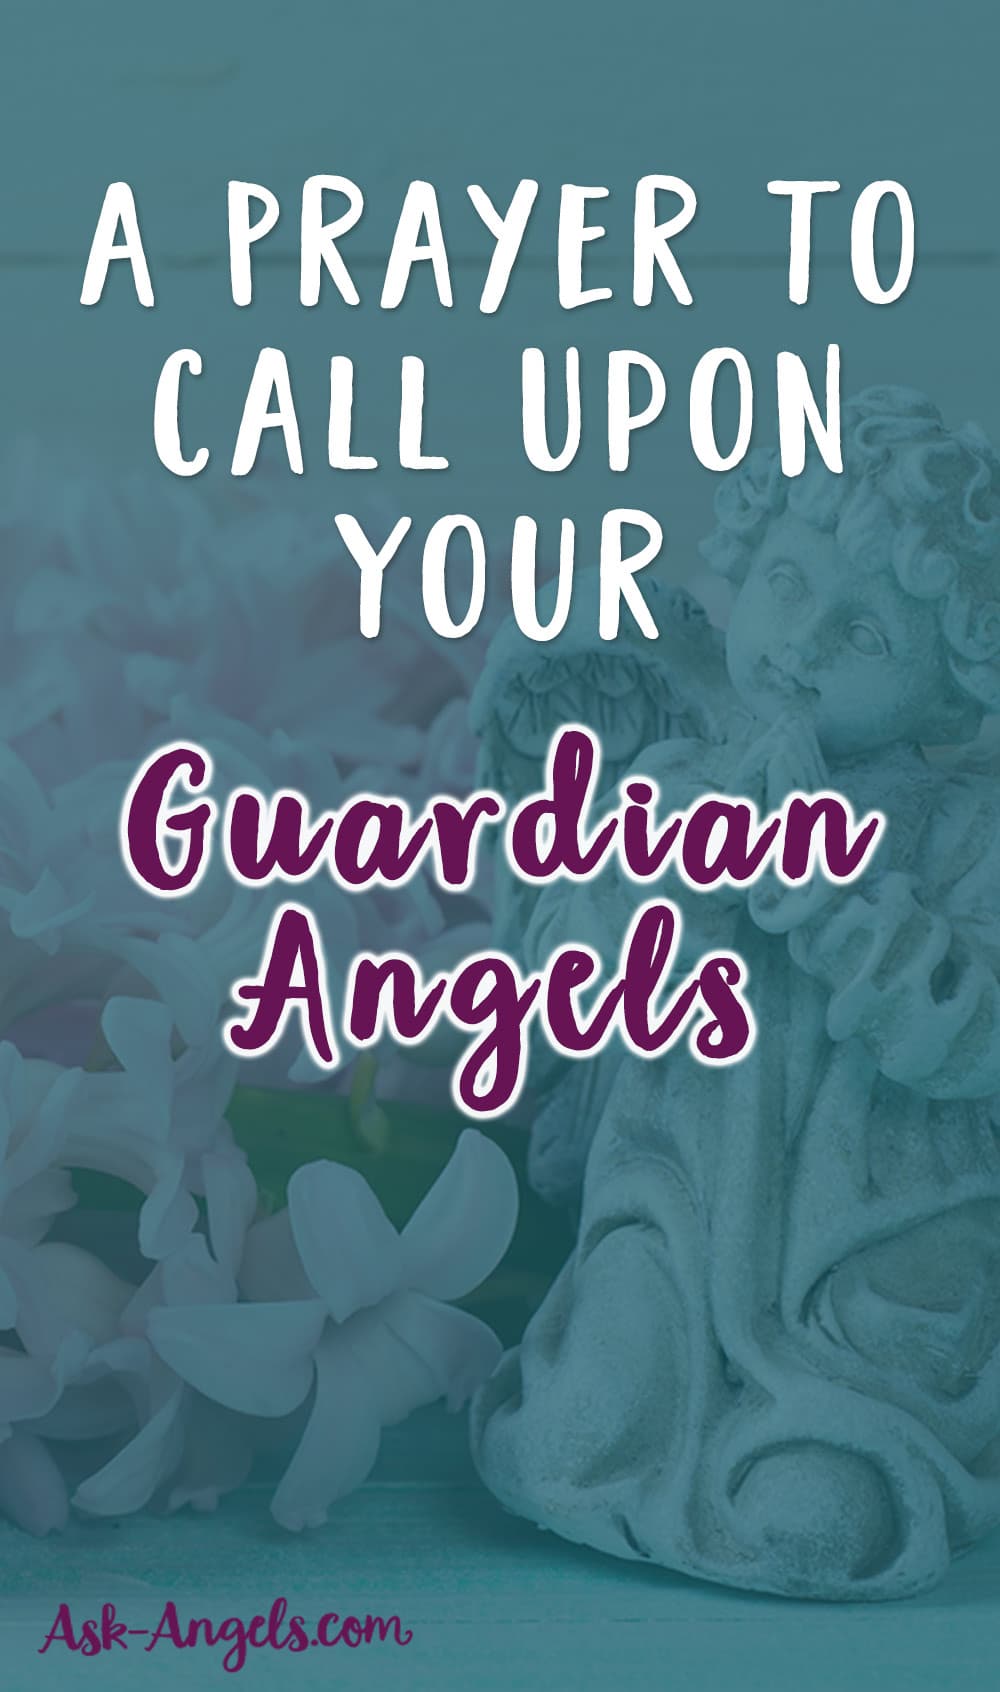 A Prayer to Call Upon Your Guardian Angels